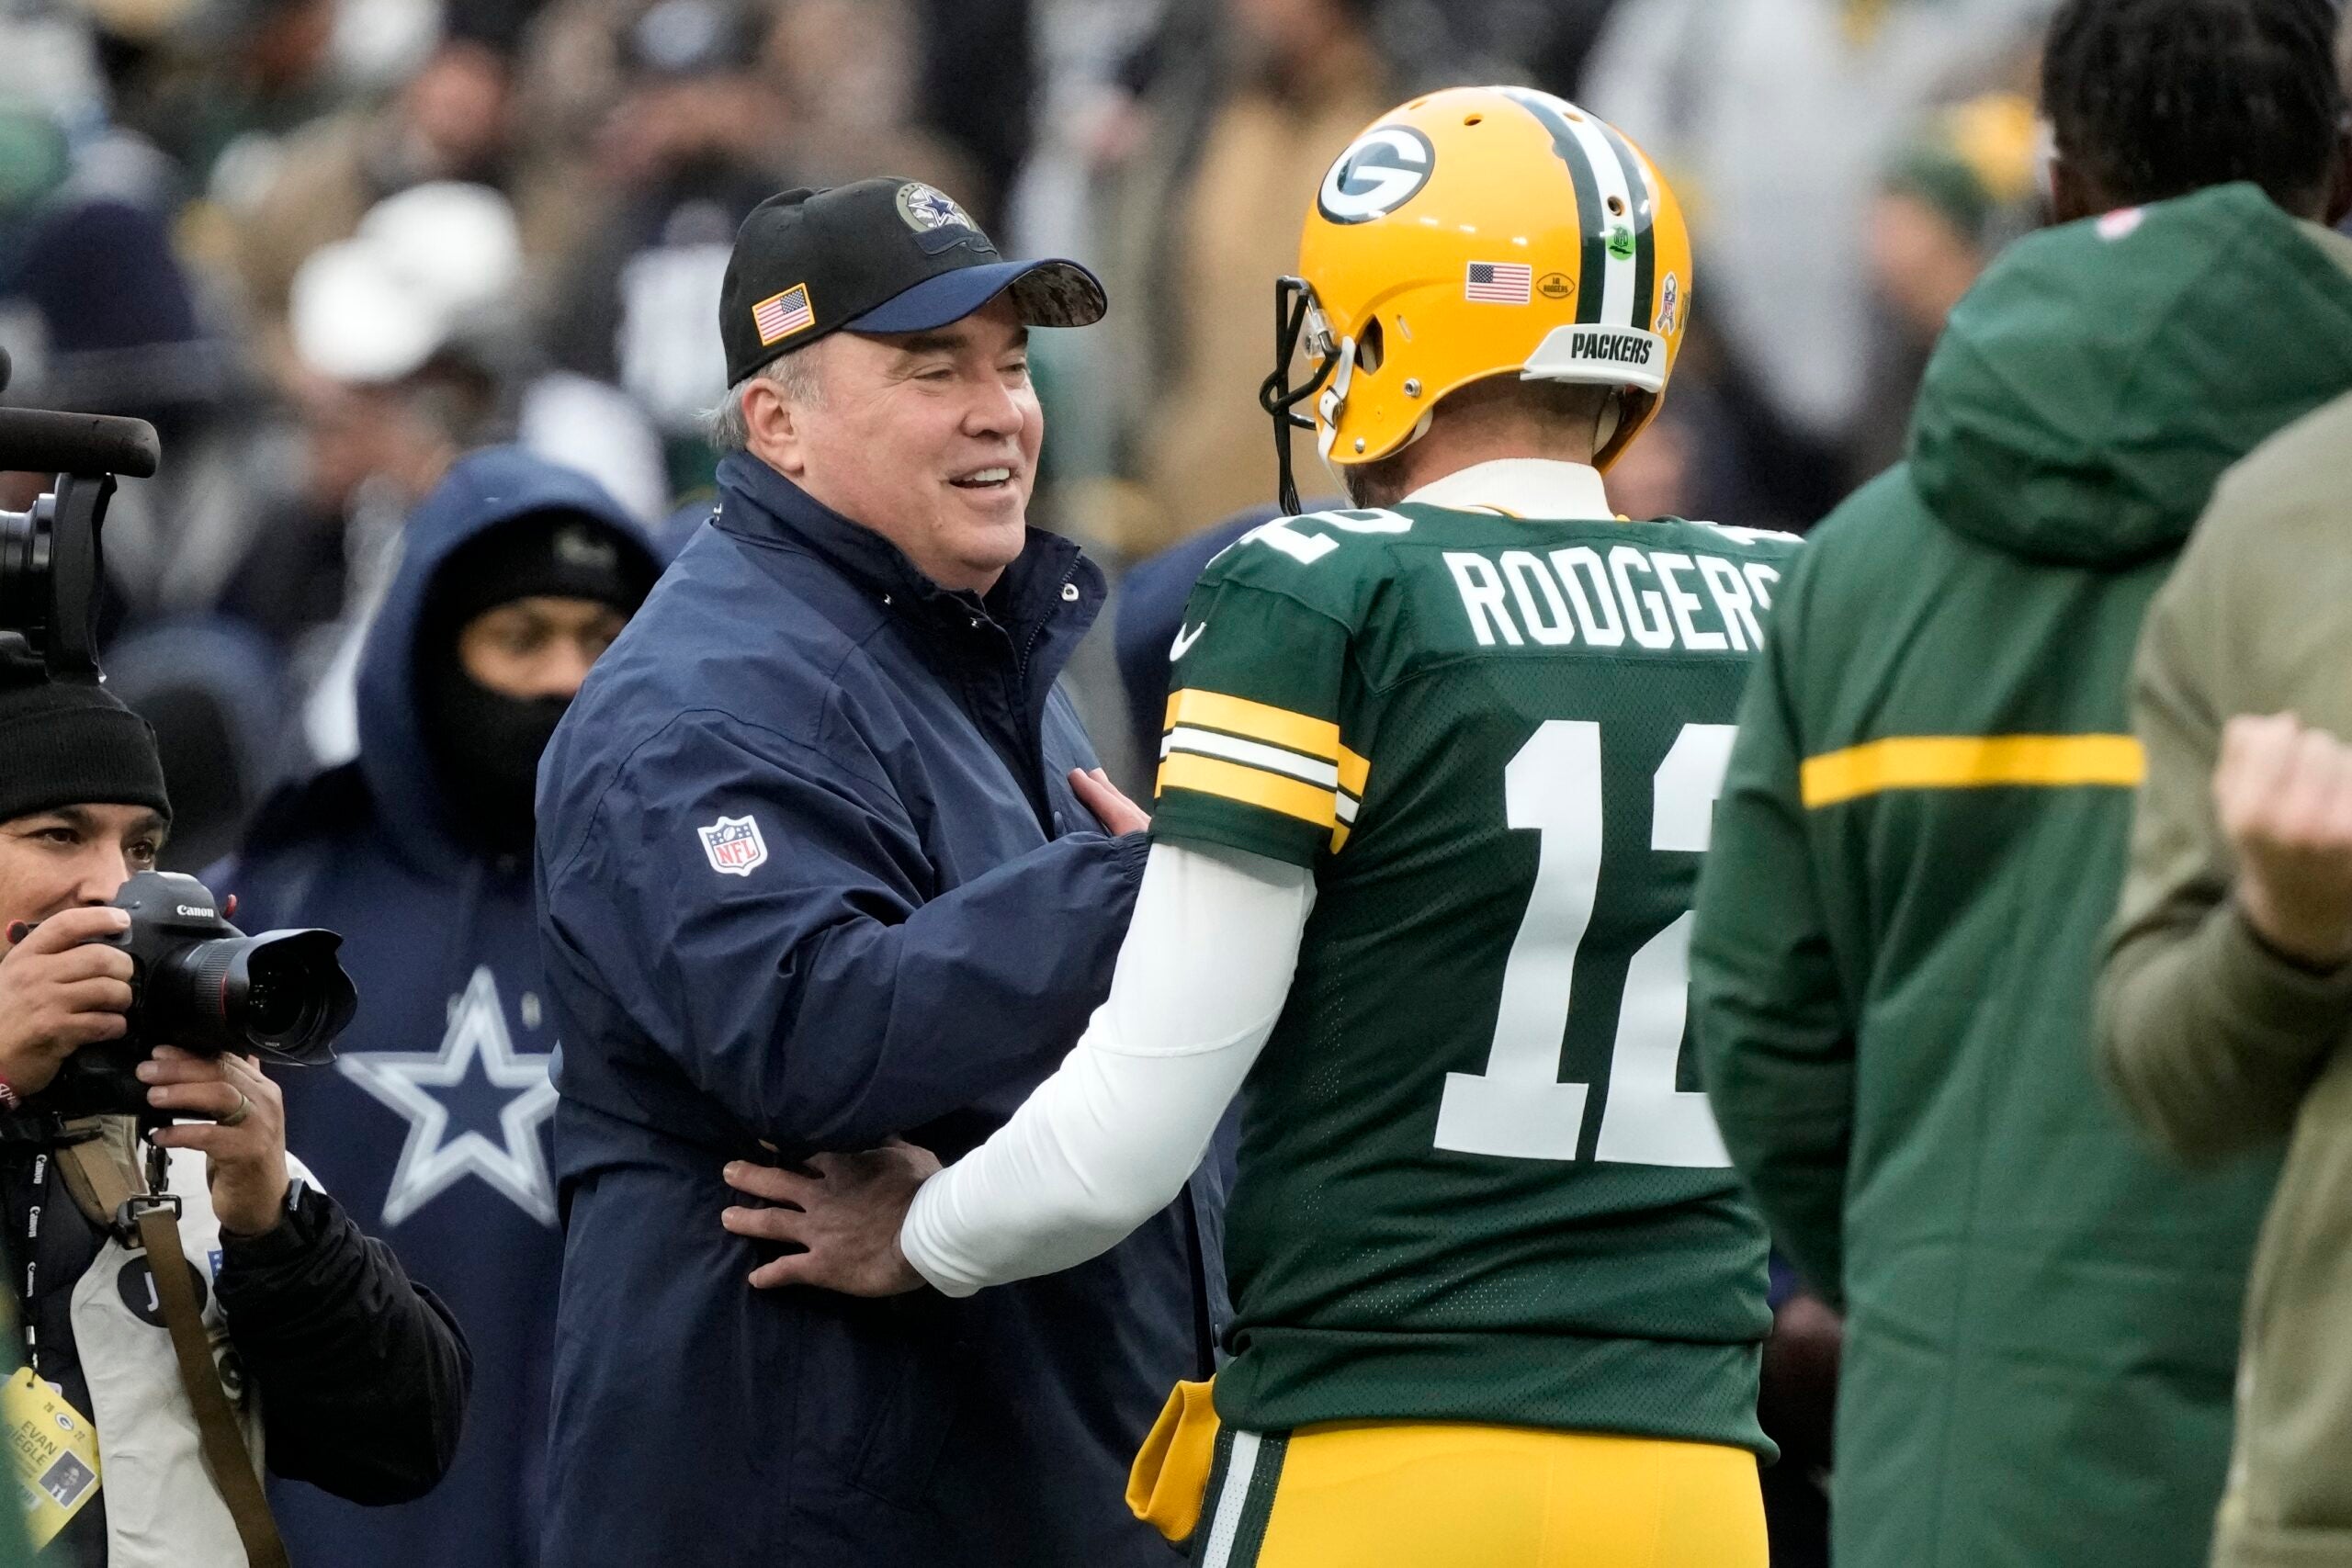 Dallas Cowboys head coach Mike McCarthy, left, and Green Bay Packers quarterback Aaron Rodgers (12) greet each other during warmups before an NFL football game Sunday, Nov. 13, 2022, in Green Bay, Wis.